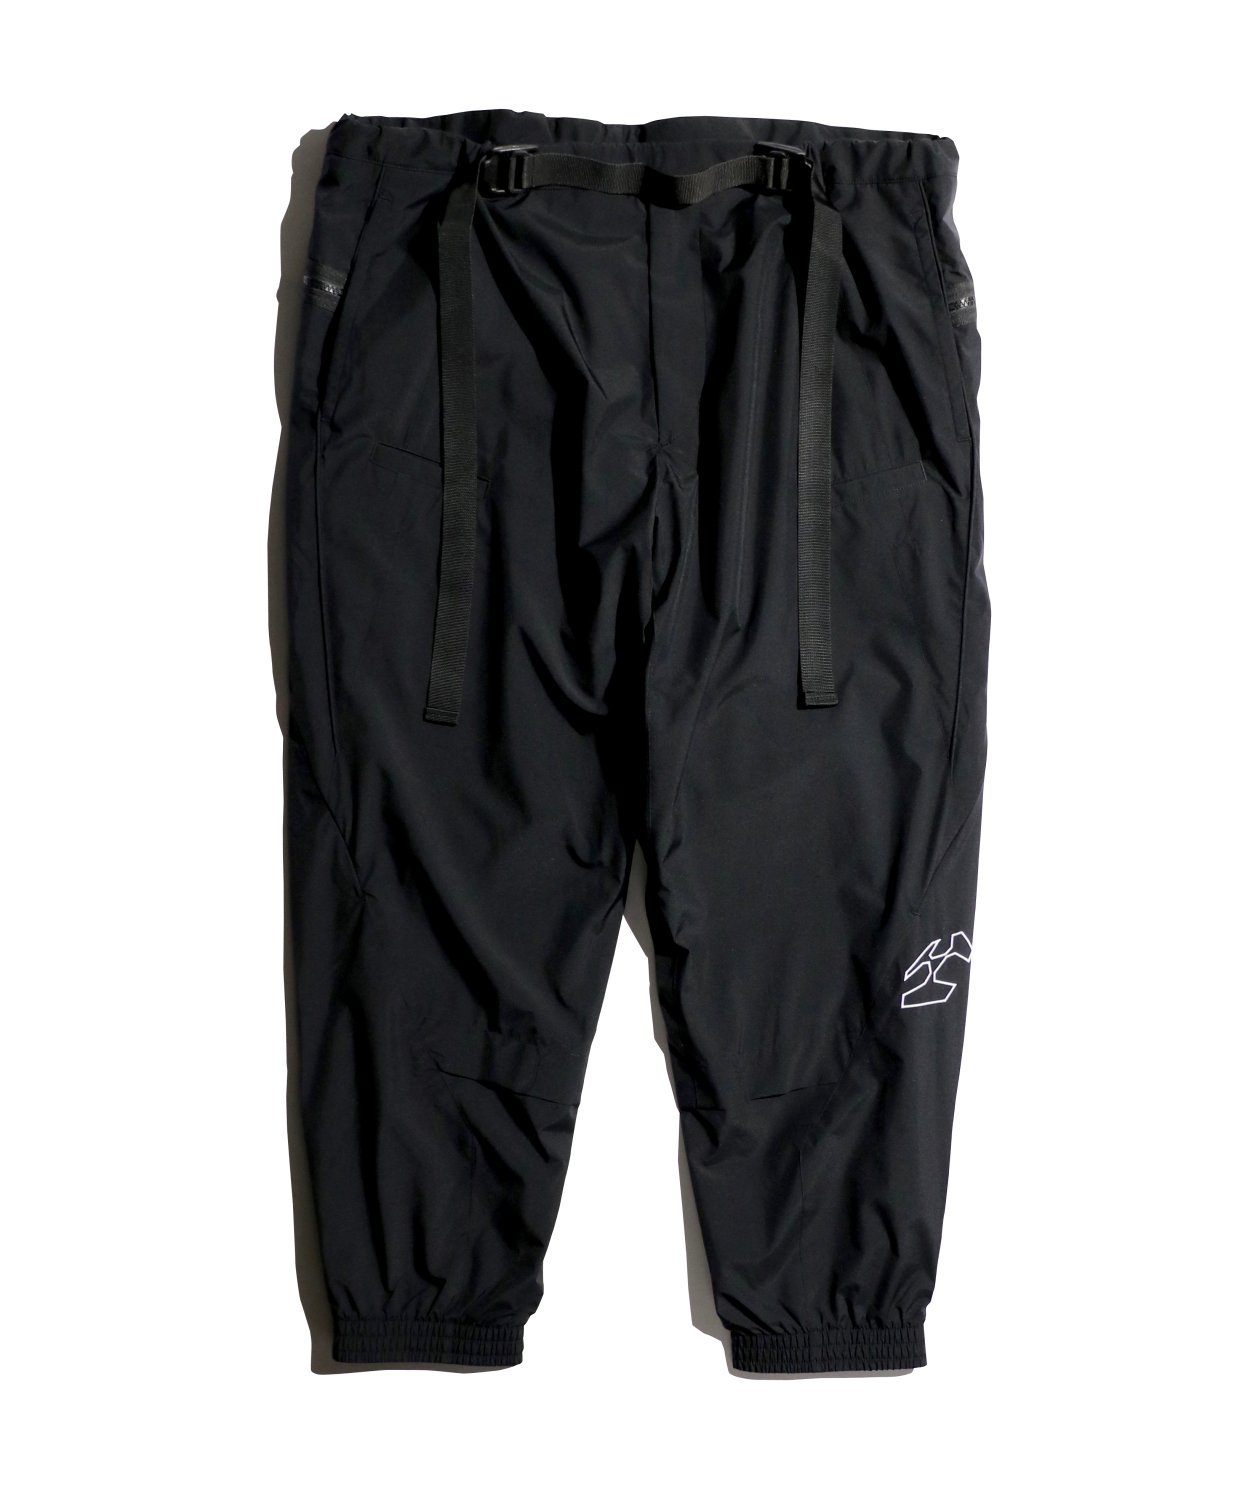 ACRONYM / 2L GORE-TEX® WINDSTOPPER® INSULATED VENT PANTS [LOOSE